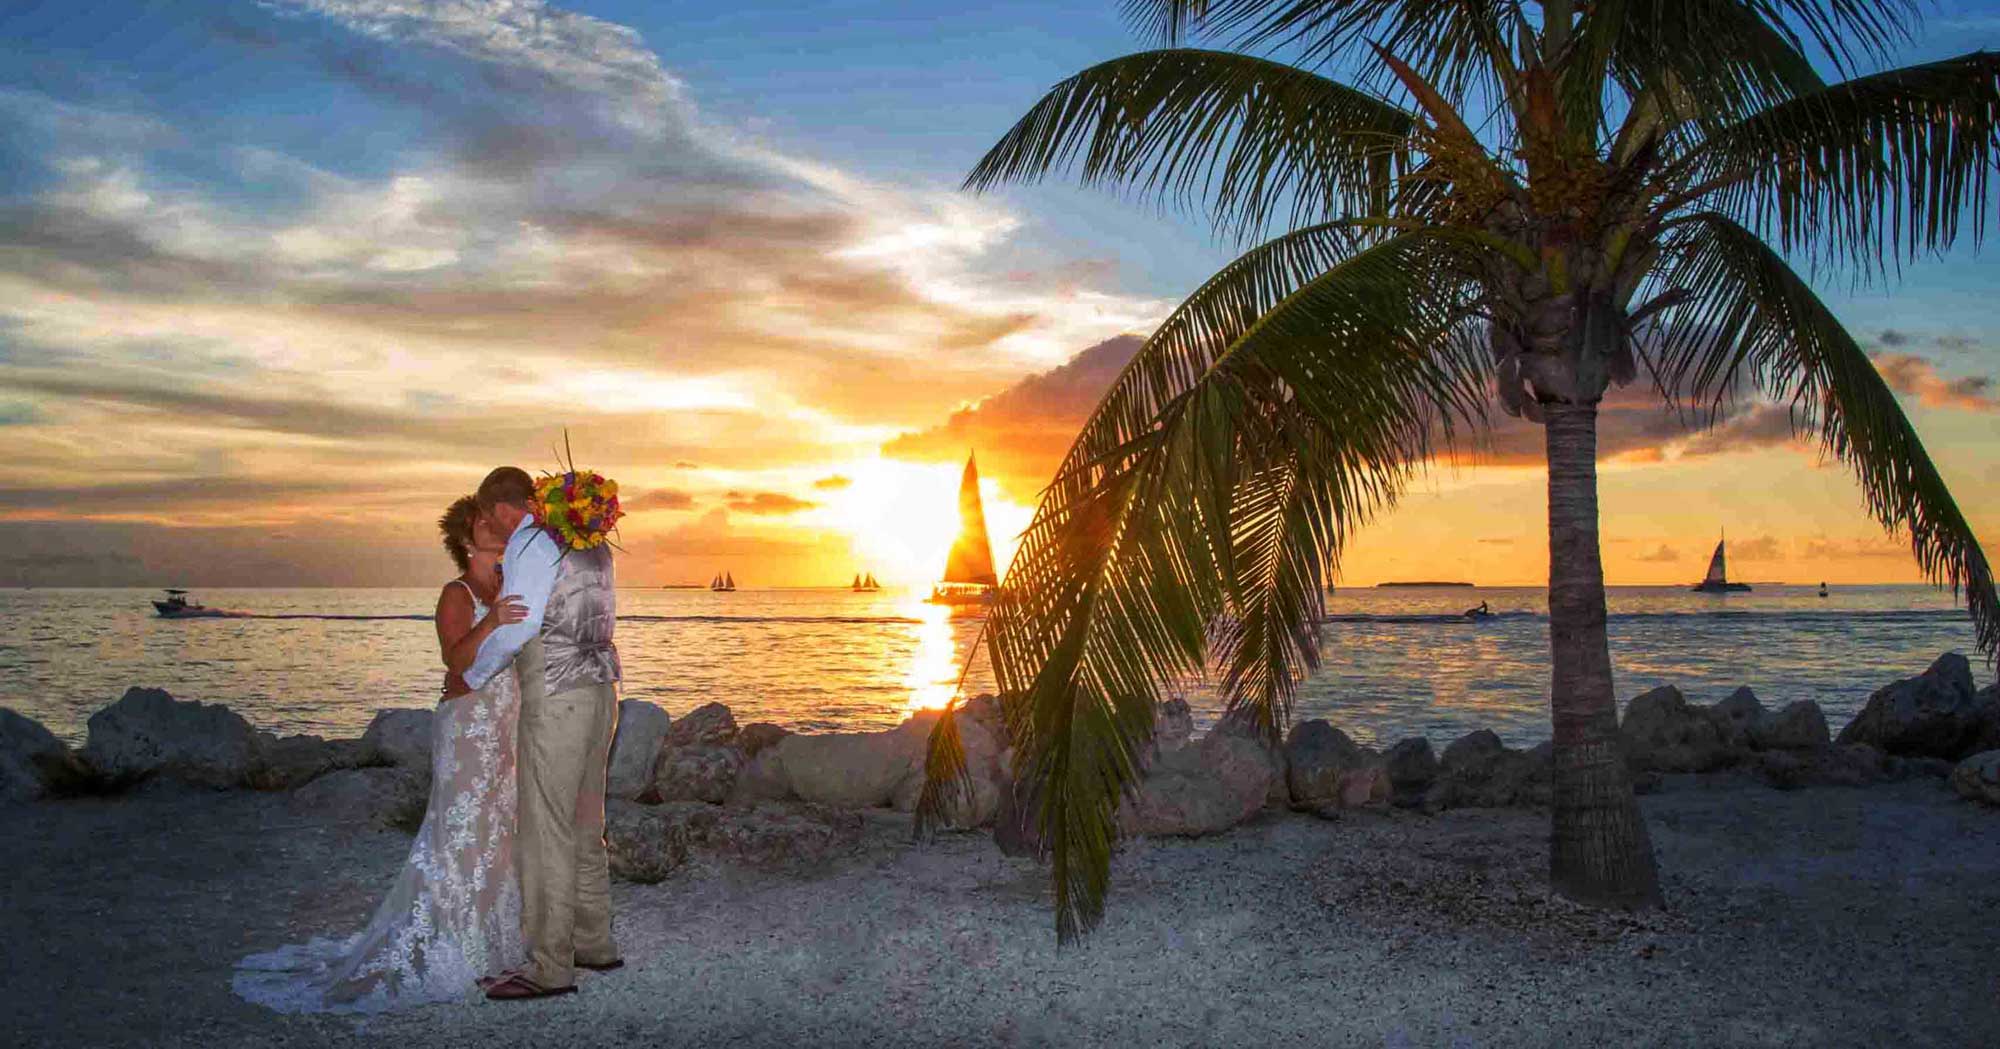 A breathtaking bride and groom enjoying a romantic moment on the picturesque beach at sunset.